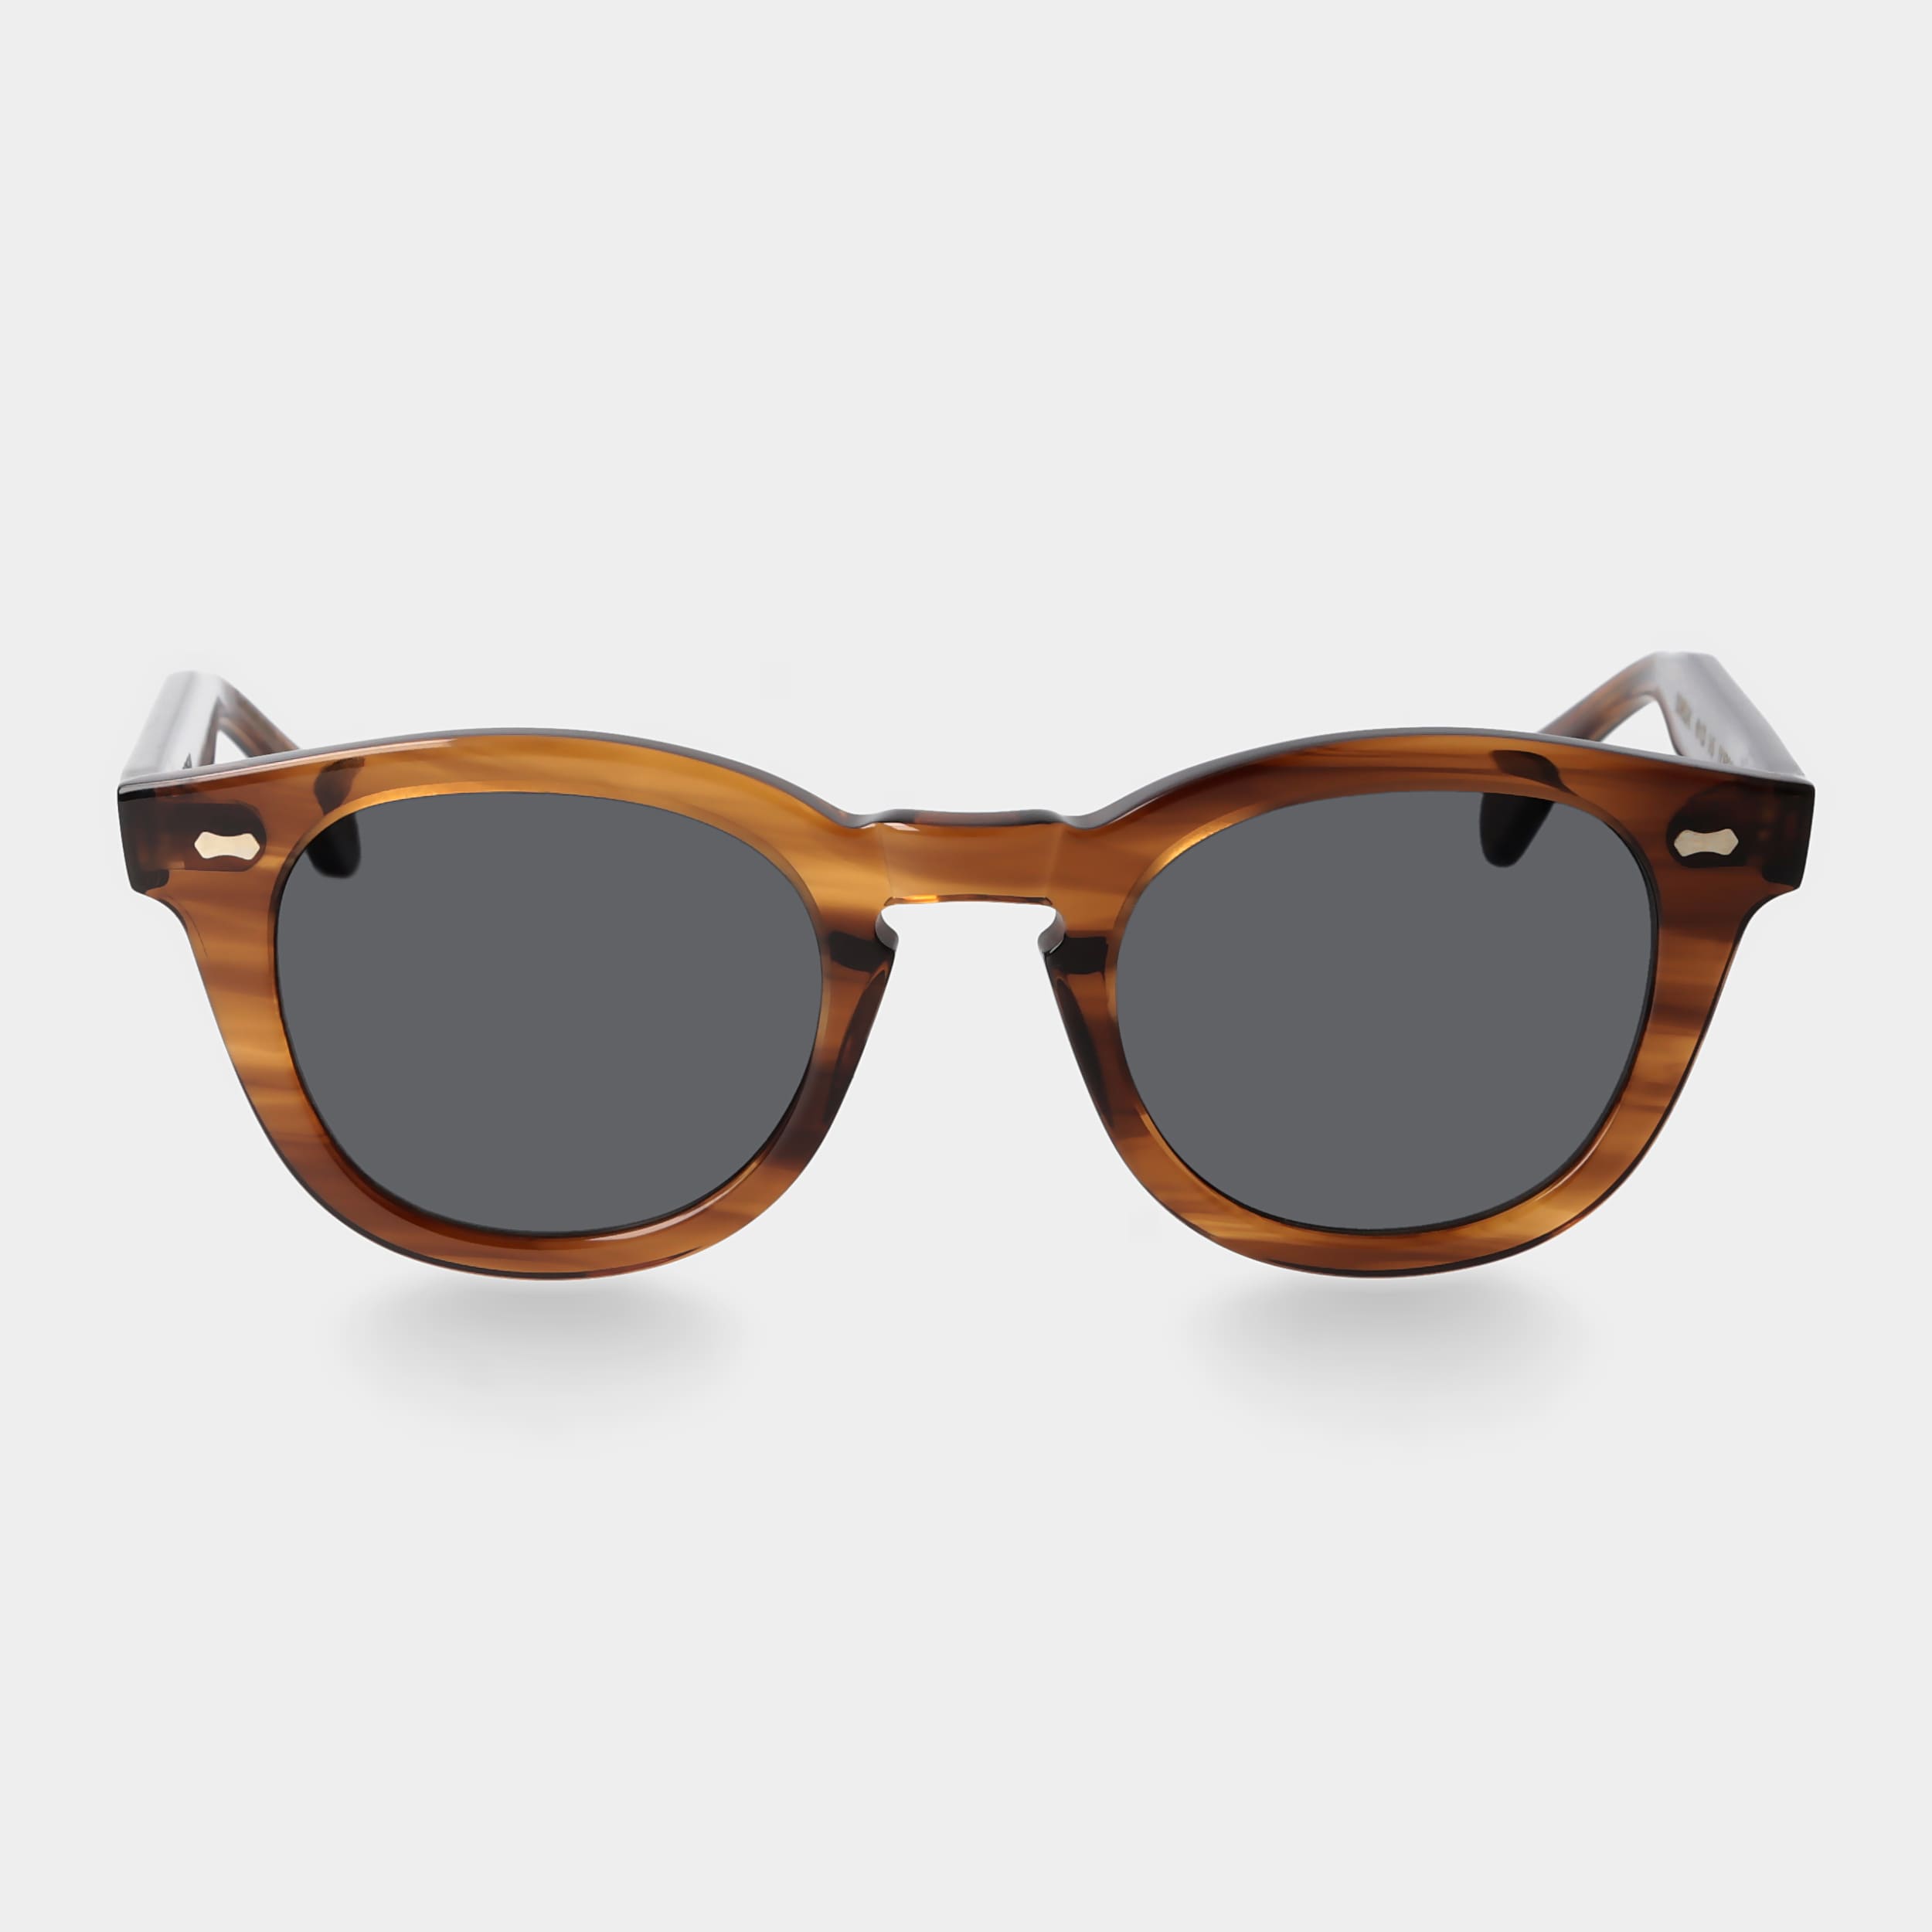 sunglasses-donegal-earth-bio-gradient-grey-sustainable-tbd-eyewear-front